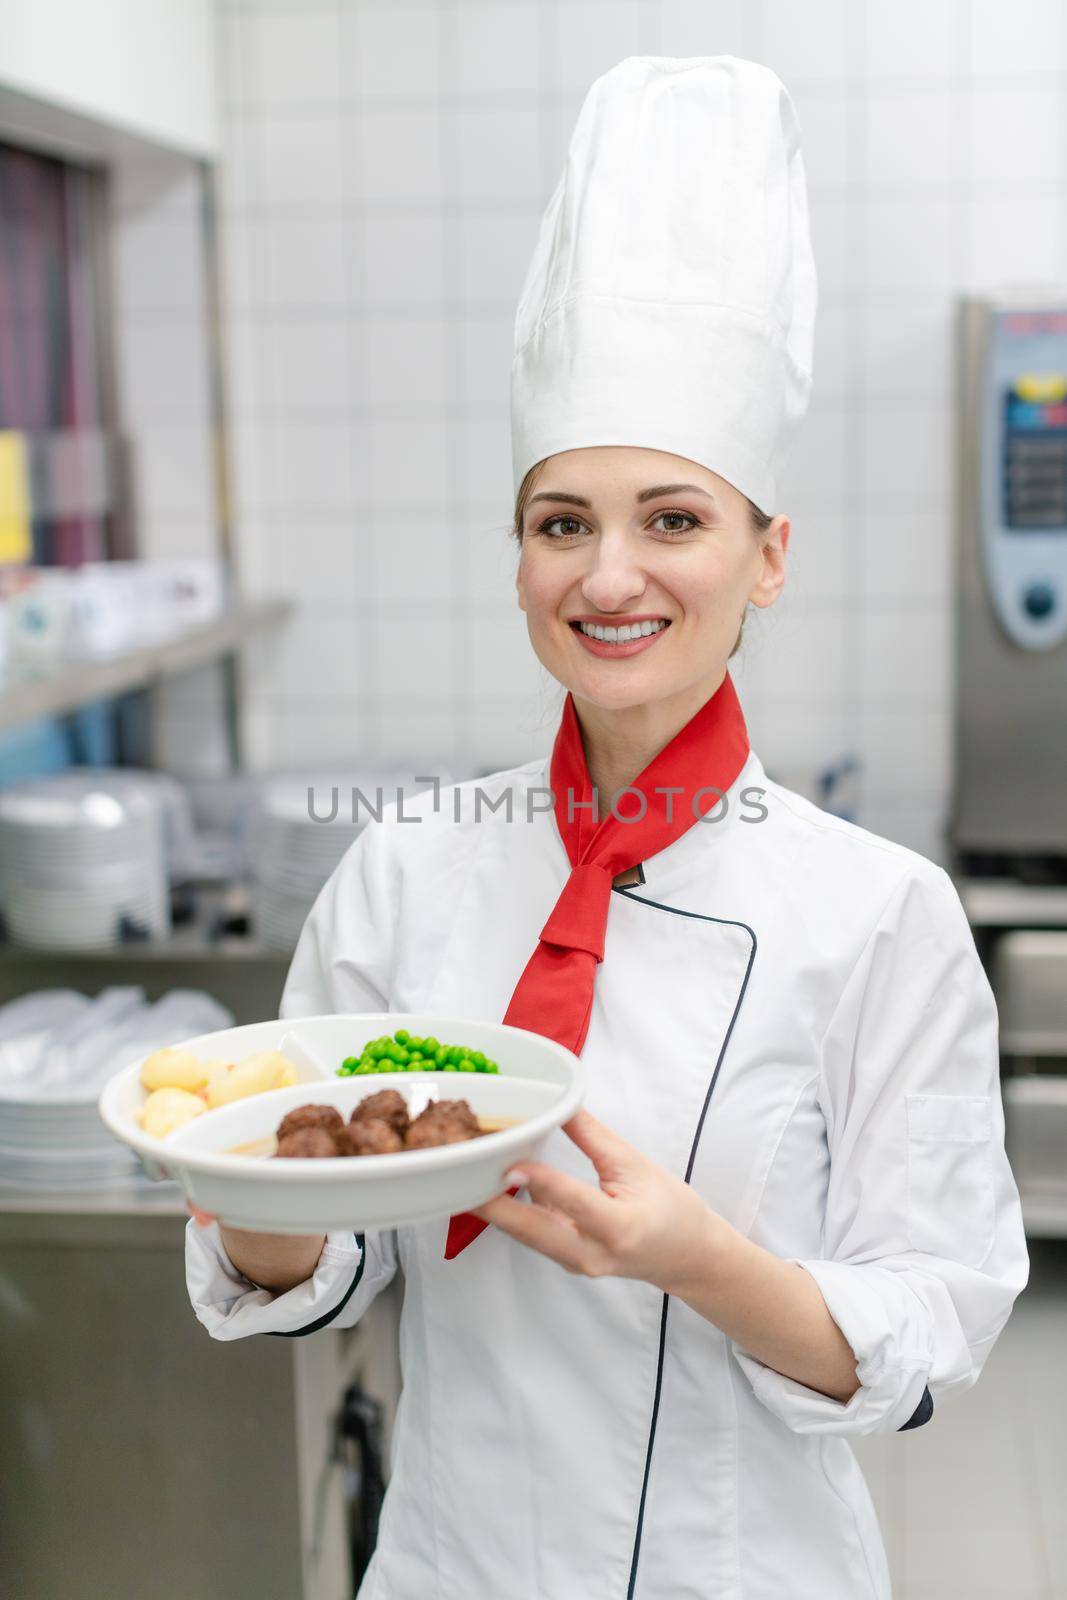 Proud cook showing plate with food in commercial kitchen of canteen